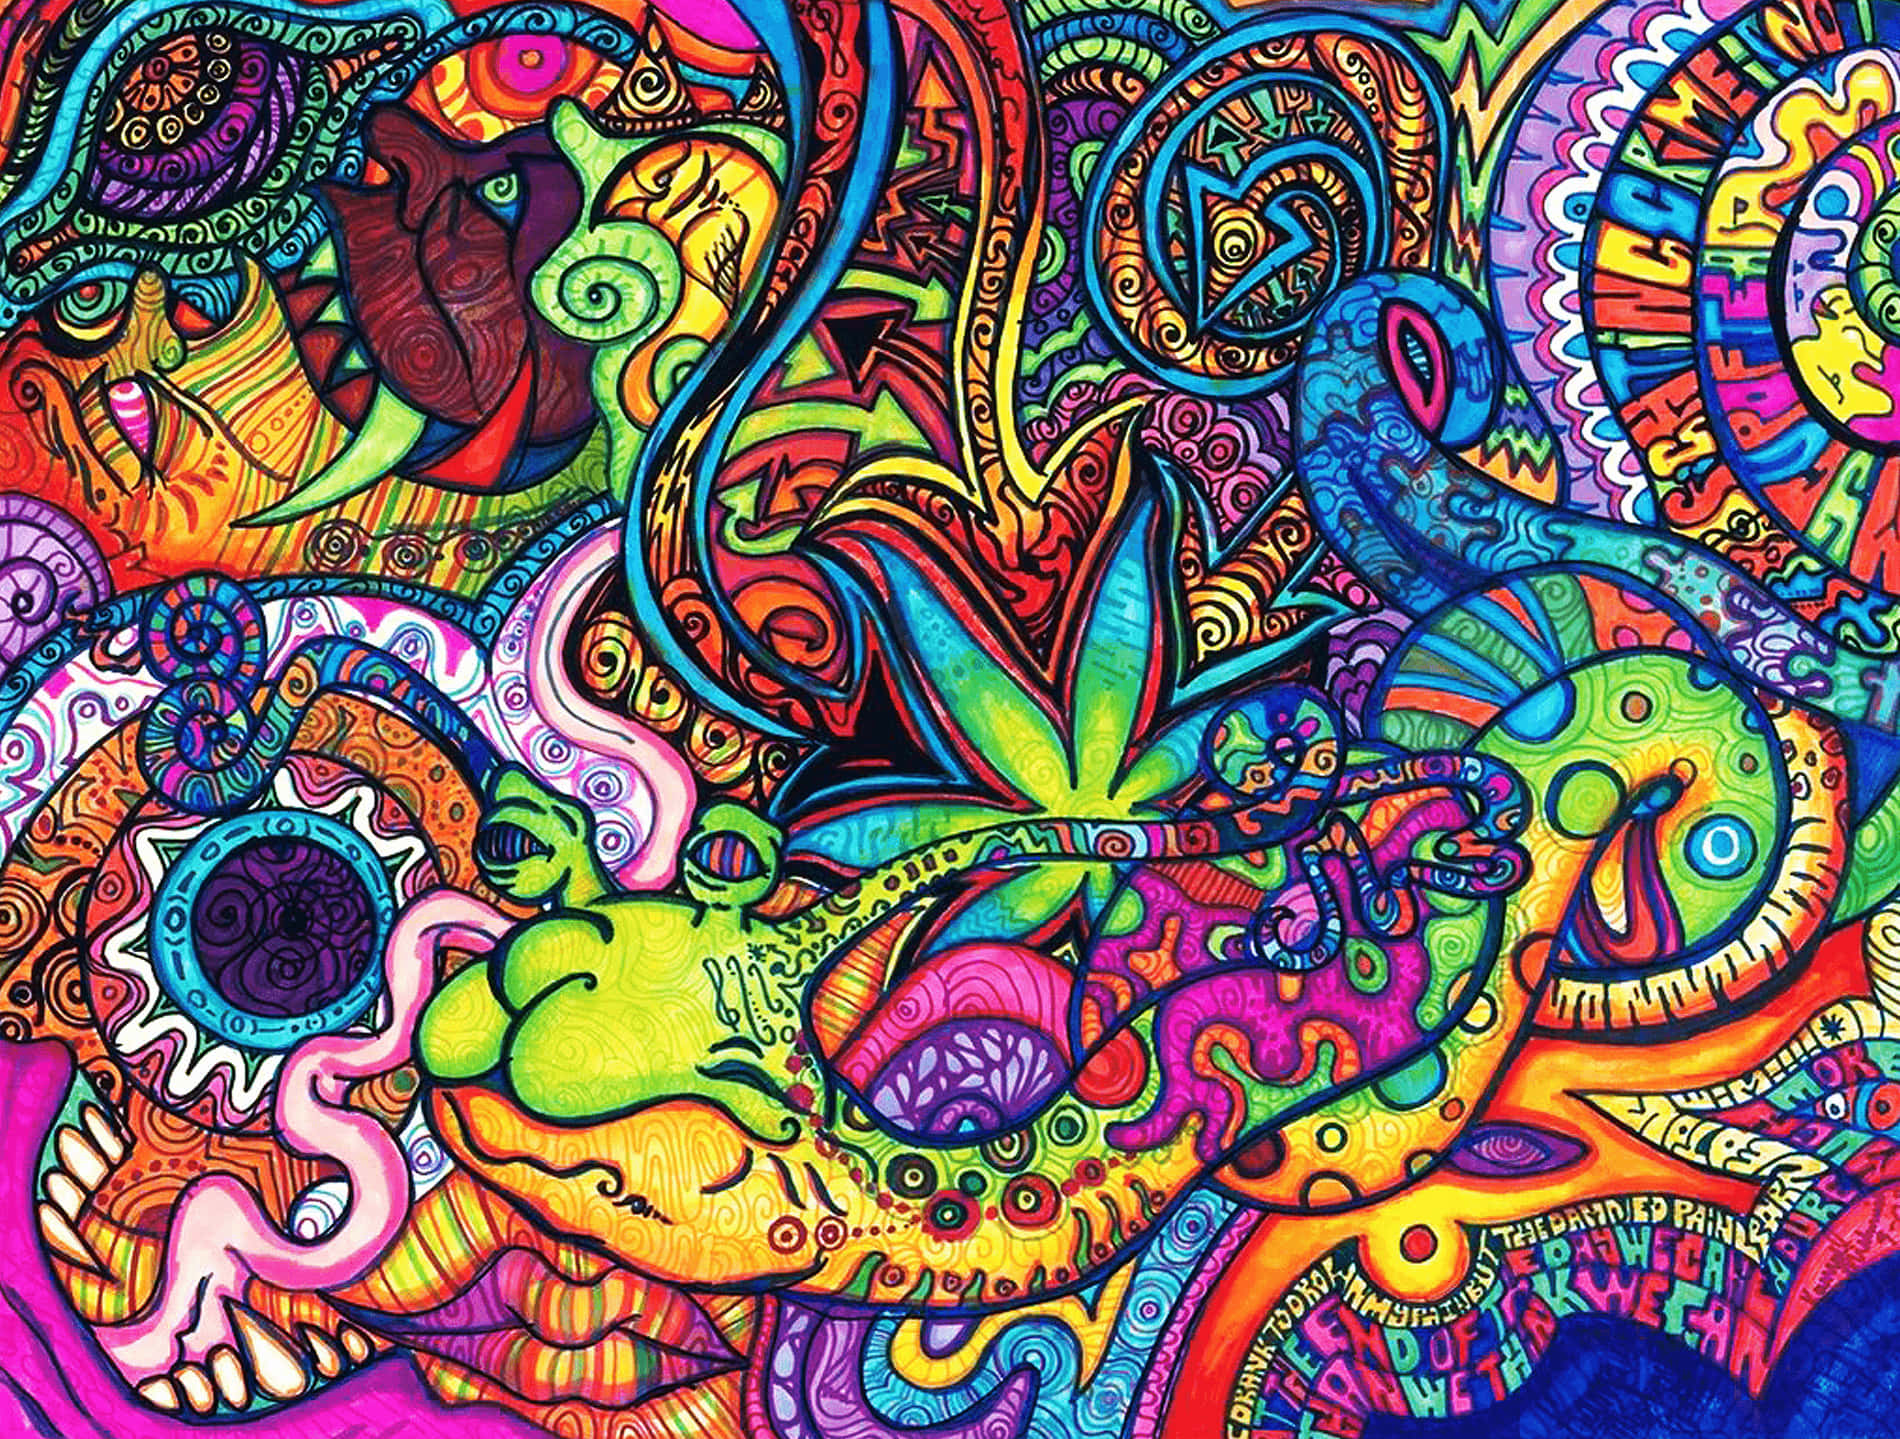 "Unlock your creativity with the power of vivid psychedelic colors" Wallpaper